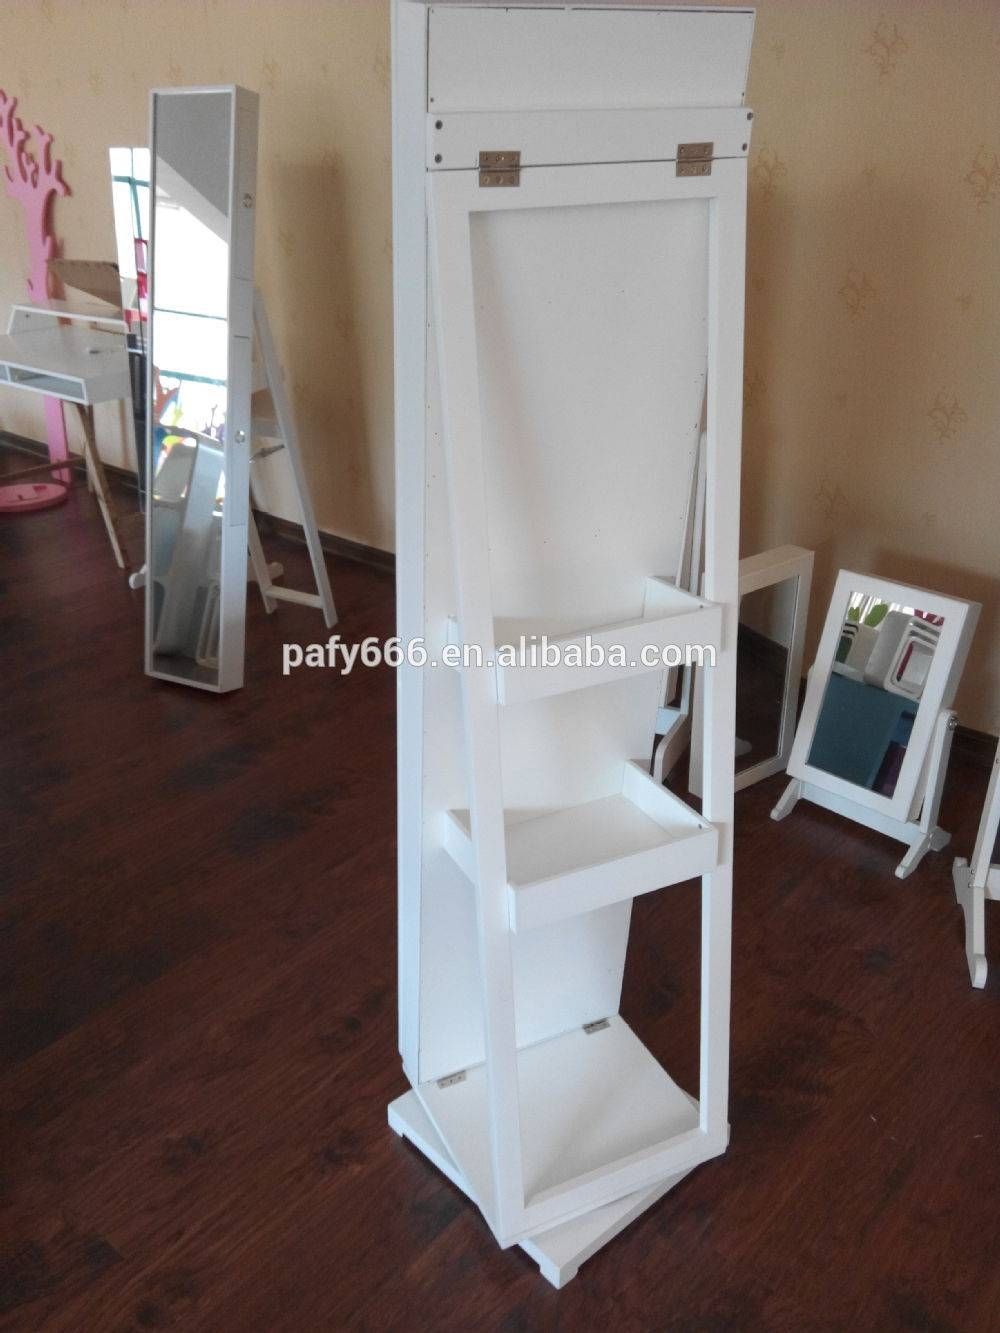 Standing Mirror Jewelry Armoire Full Length Dressing Mirror With Pertaining To Free Standing Dressing Mirrors (View 12 of 25)